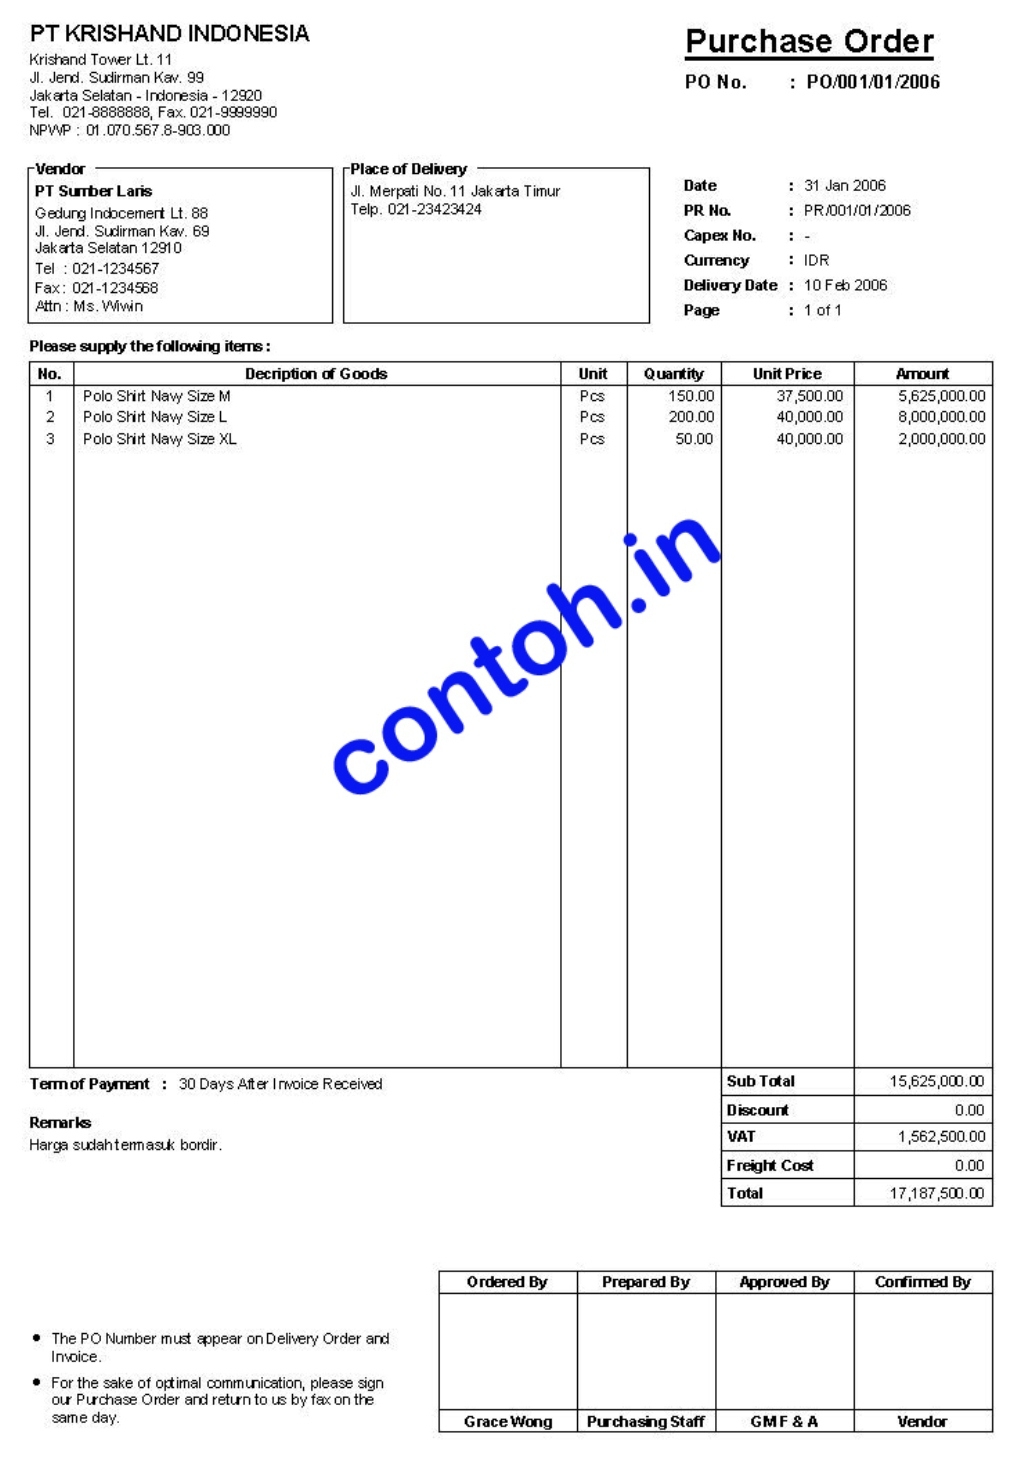 contoh contoh formulir purchase order po contoh delivery note bahasa indo